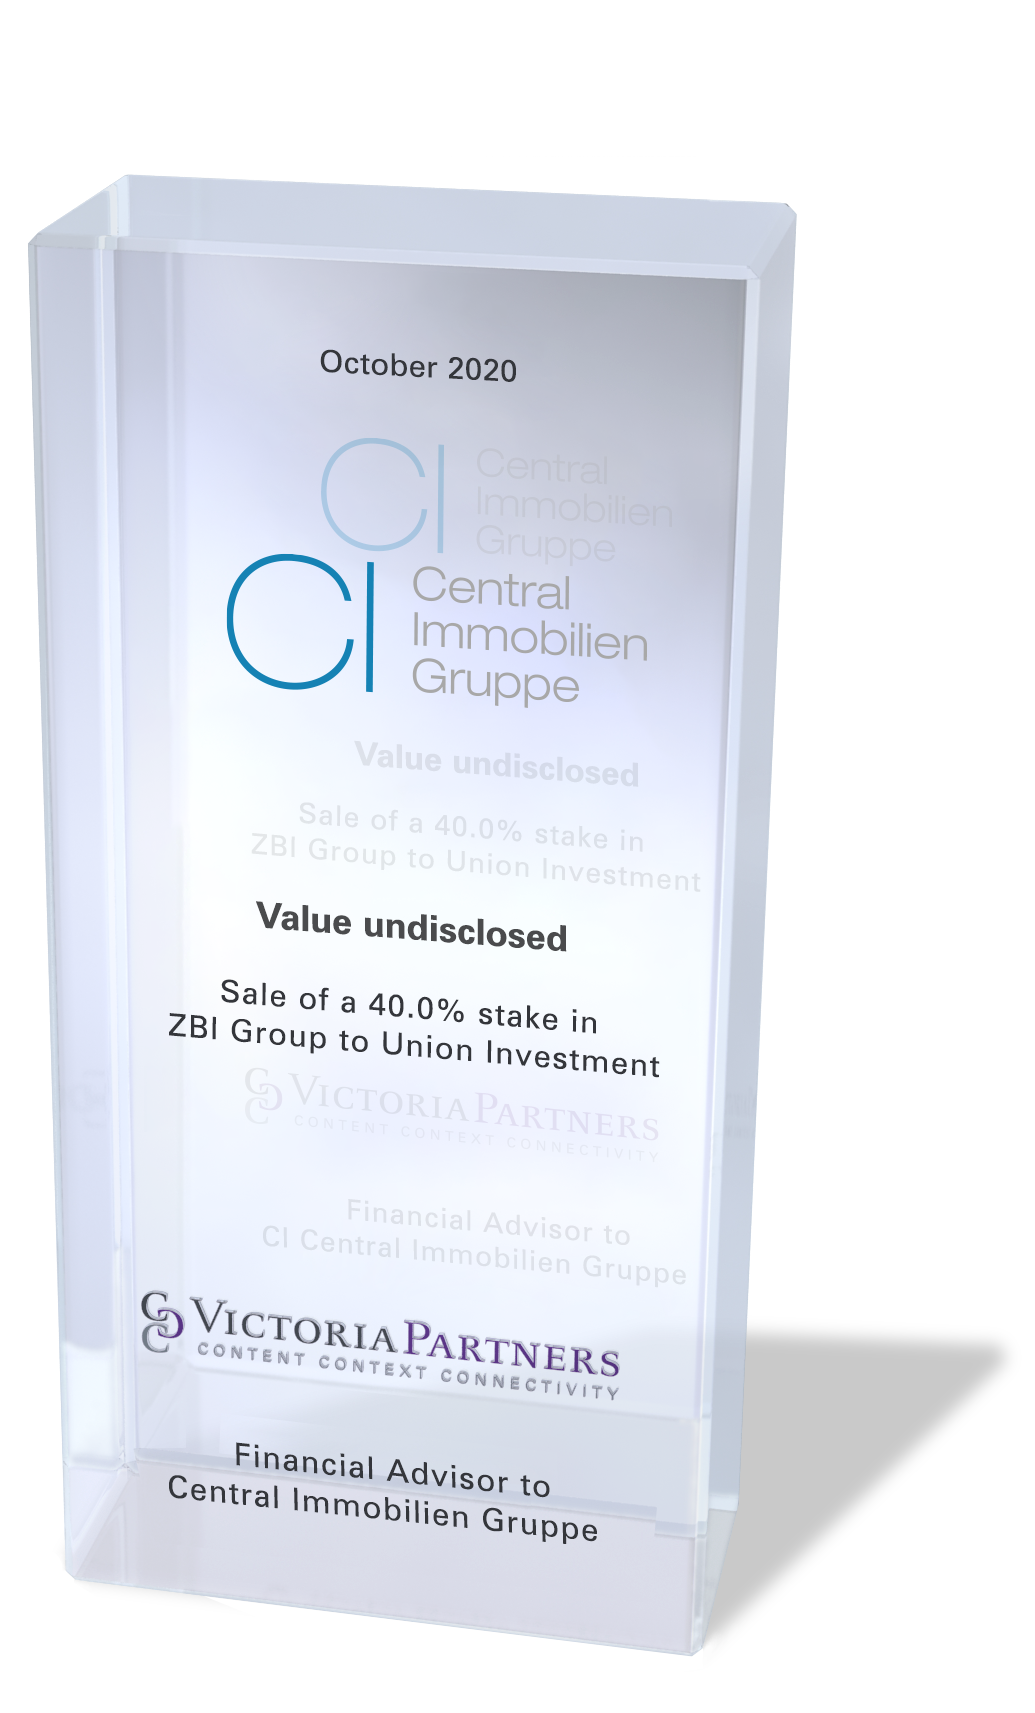 VICTORIAPARTNERS - Financial Advisor to Central Immobilien Gruppe - October 2020